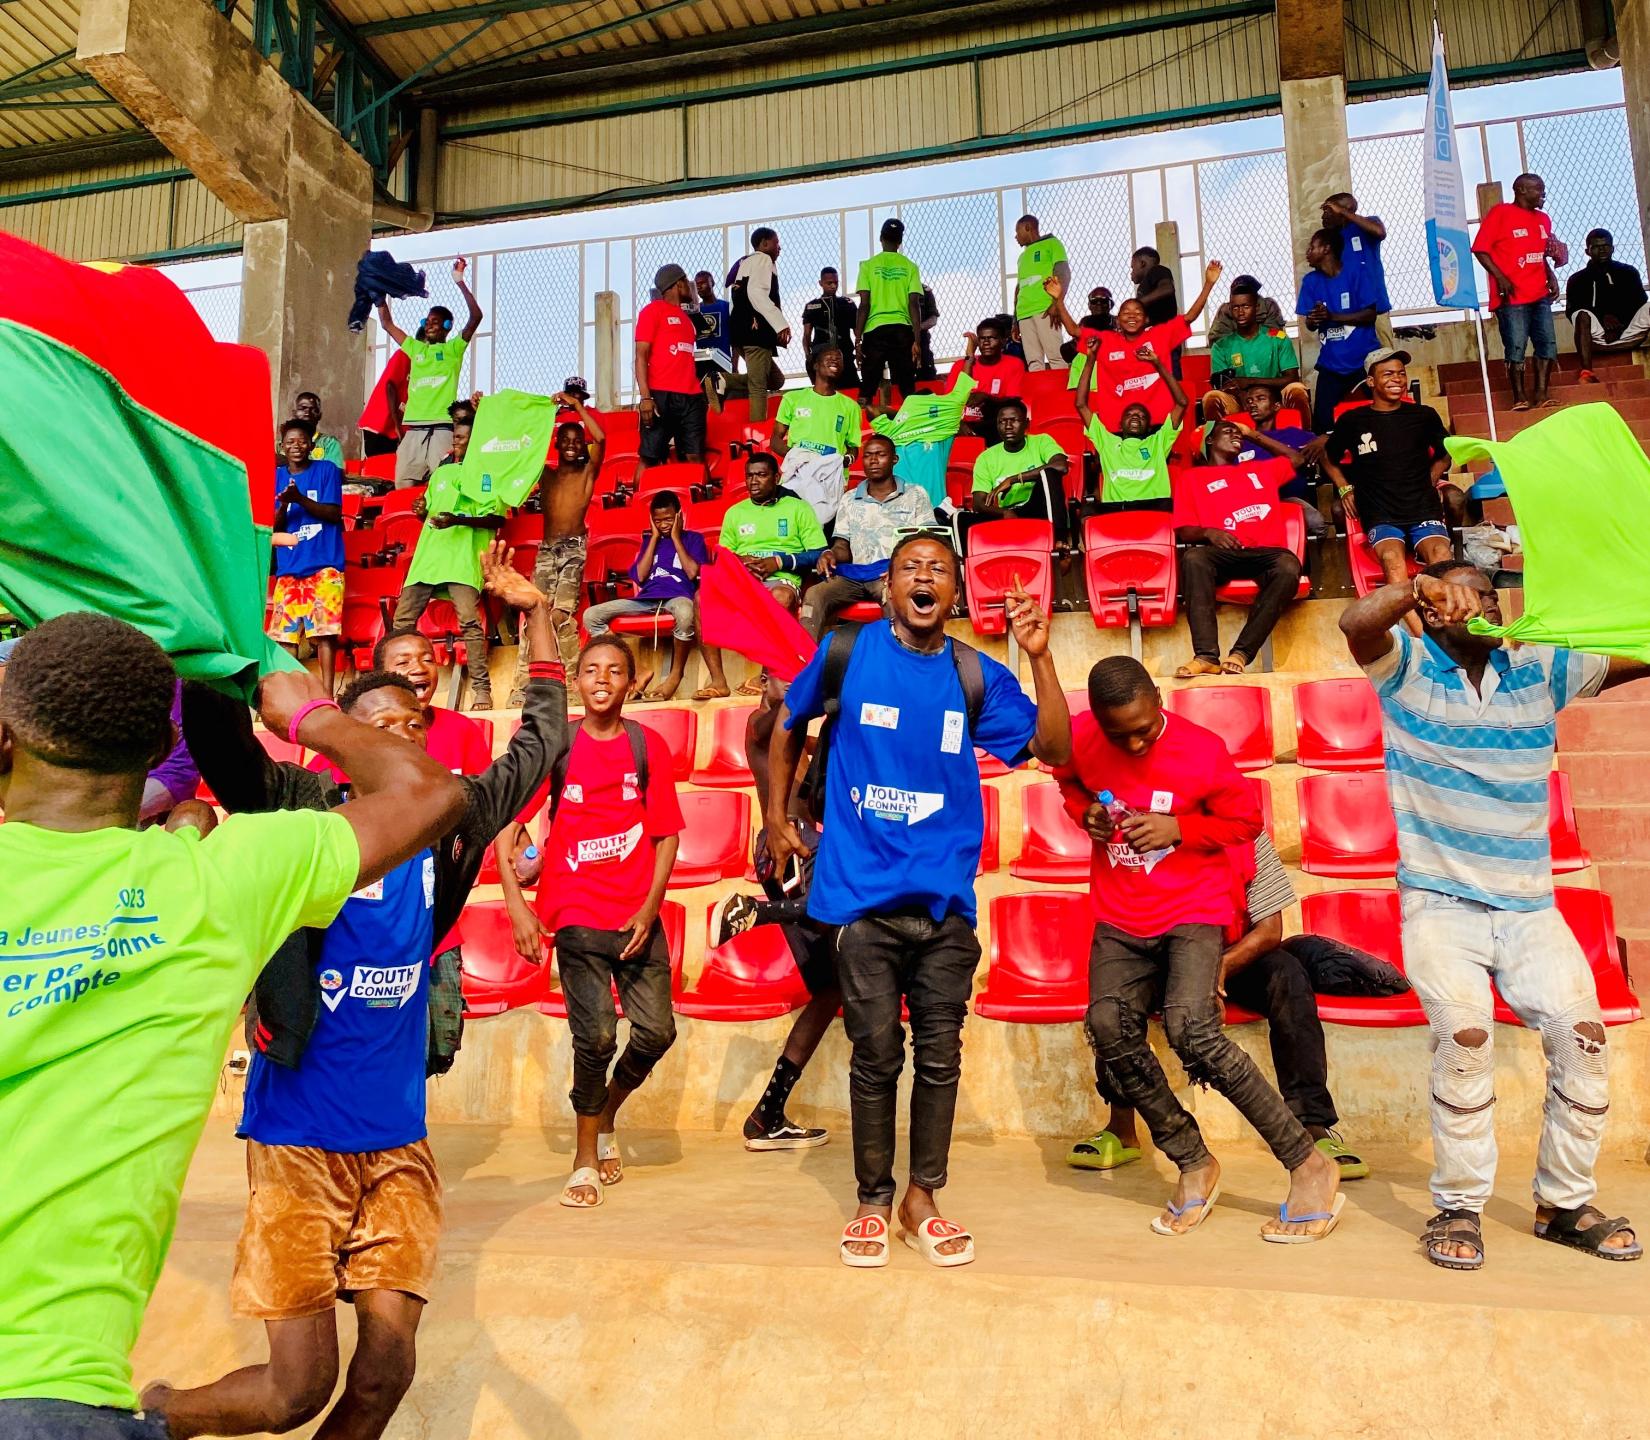 Youths jubilating a goal against UNDP, during the friendly football match